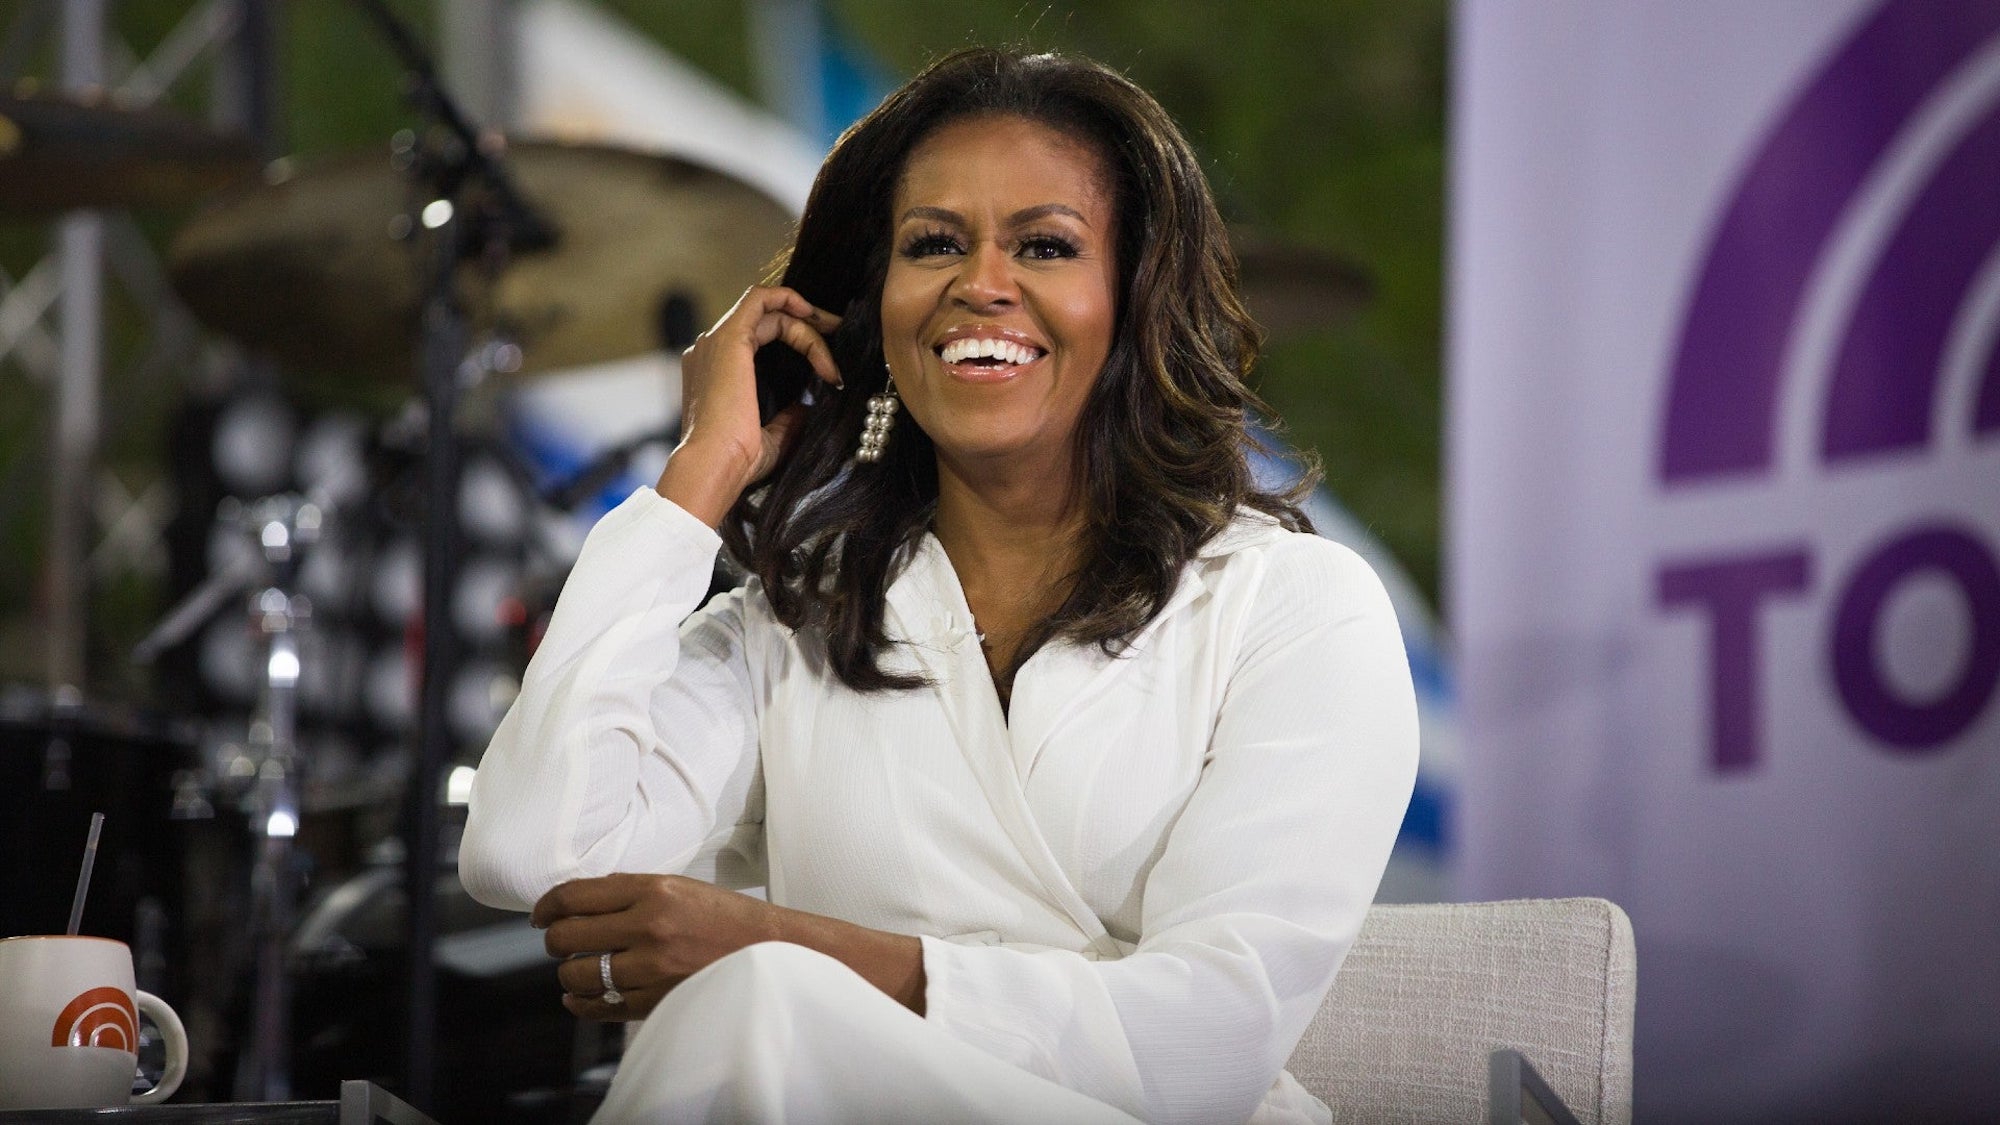 Michelle Obama Wins Grammy Award For Audio Recording Of ‘Becoming’ Memoir | HuffPost